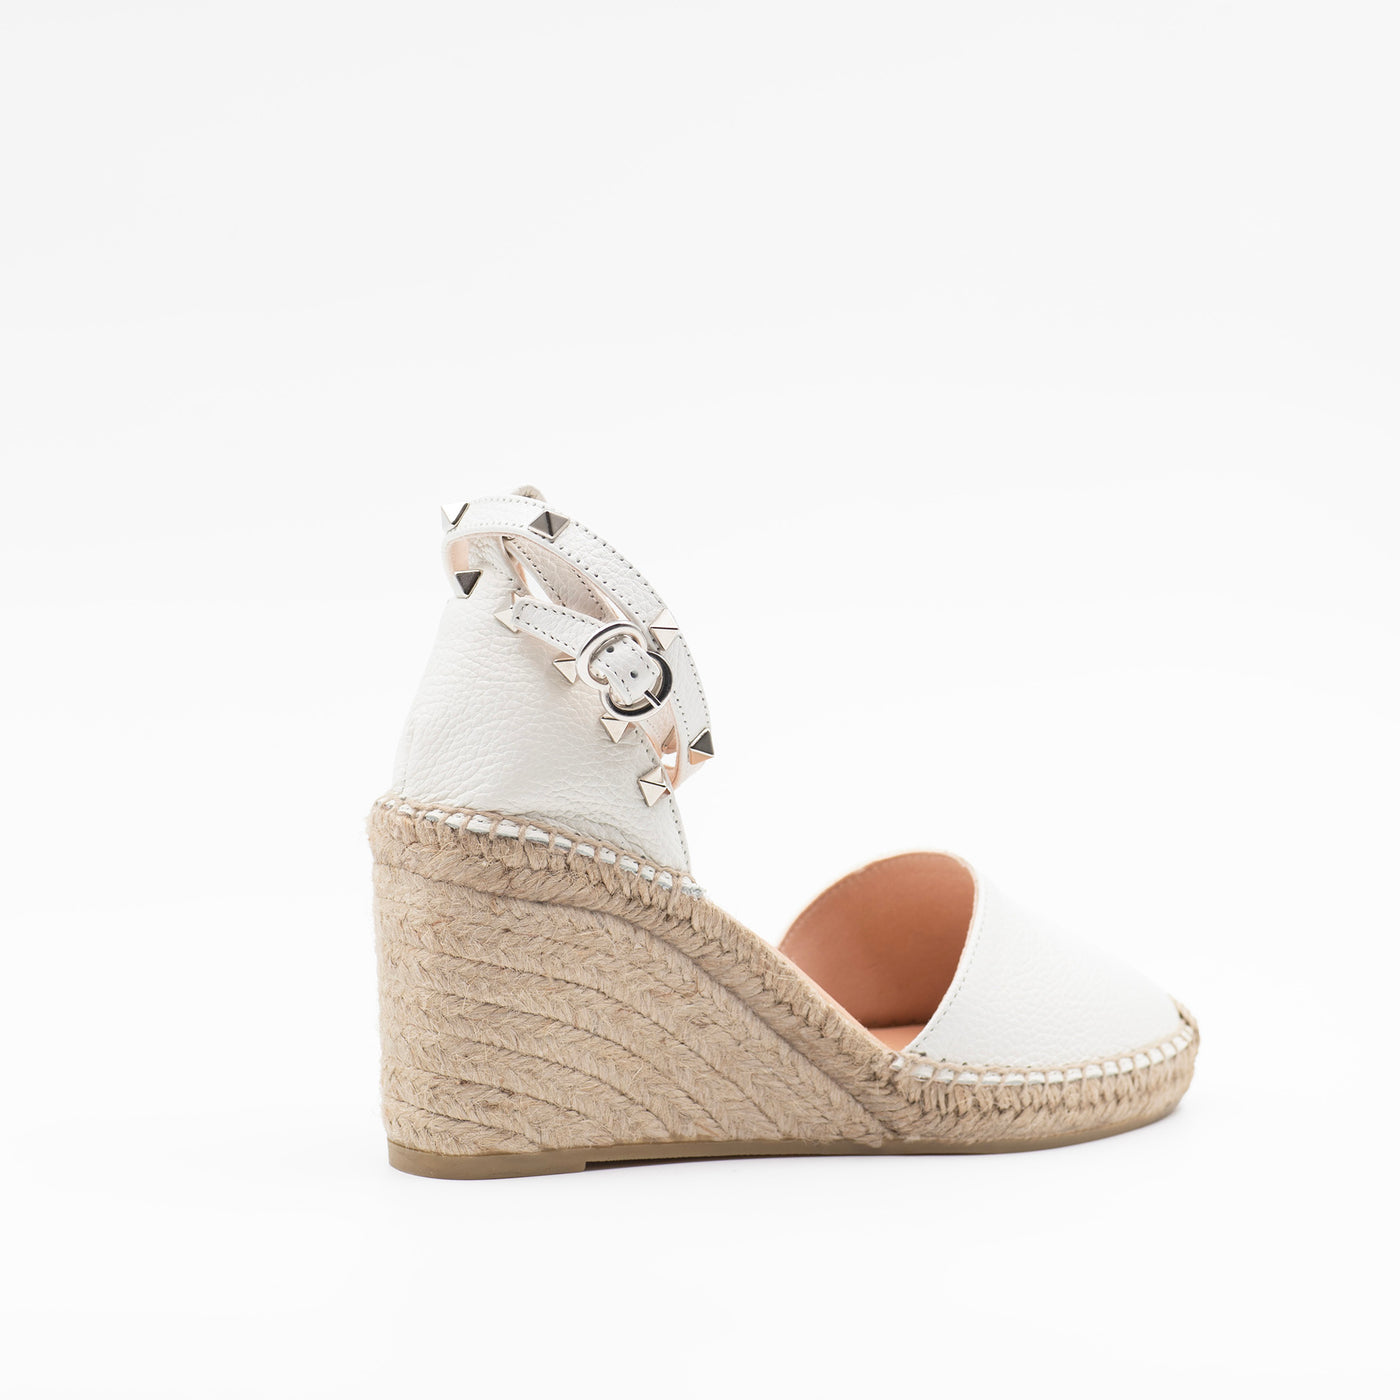 White wedge espadrille with studs